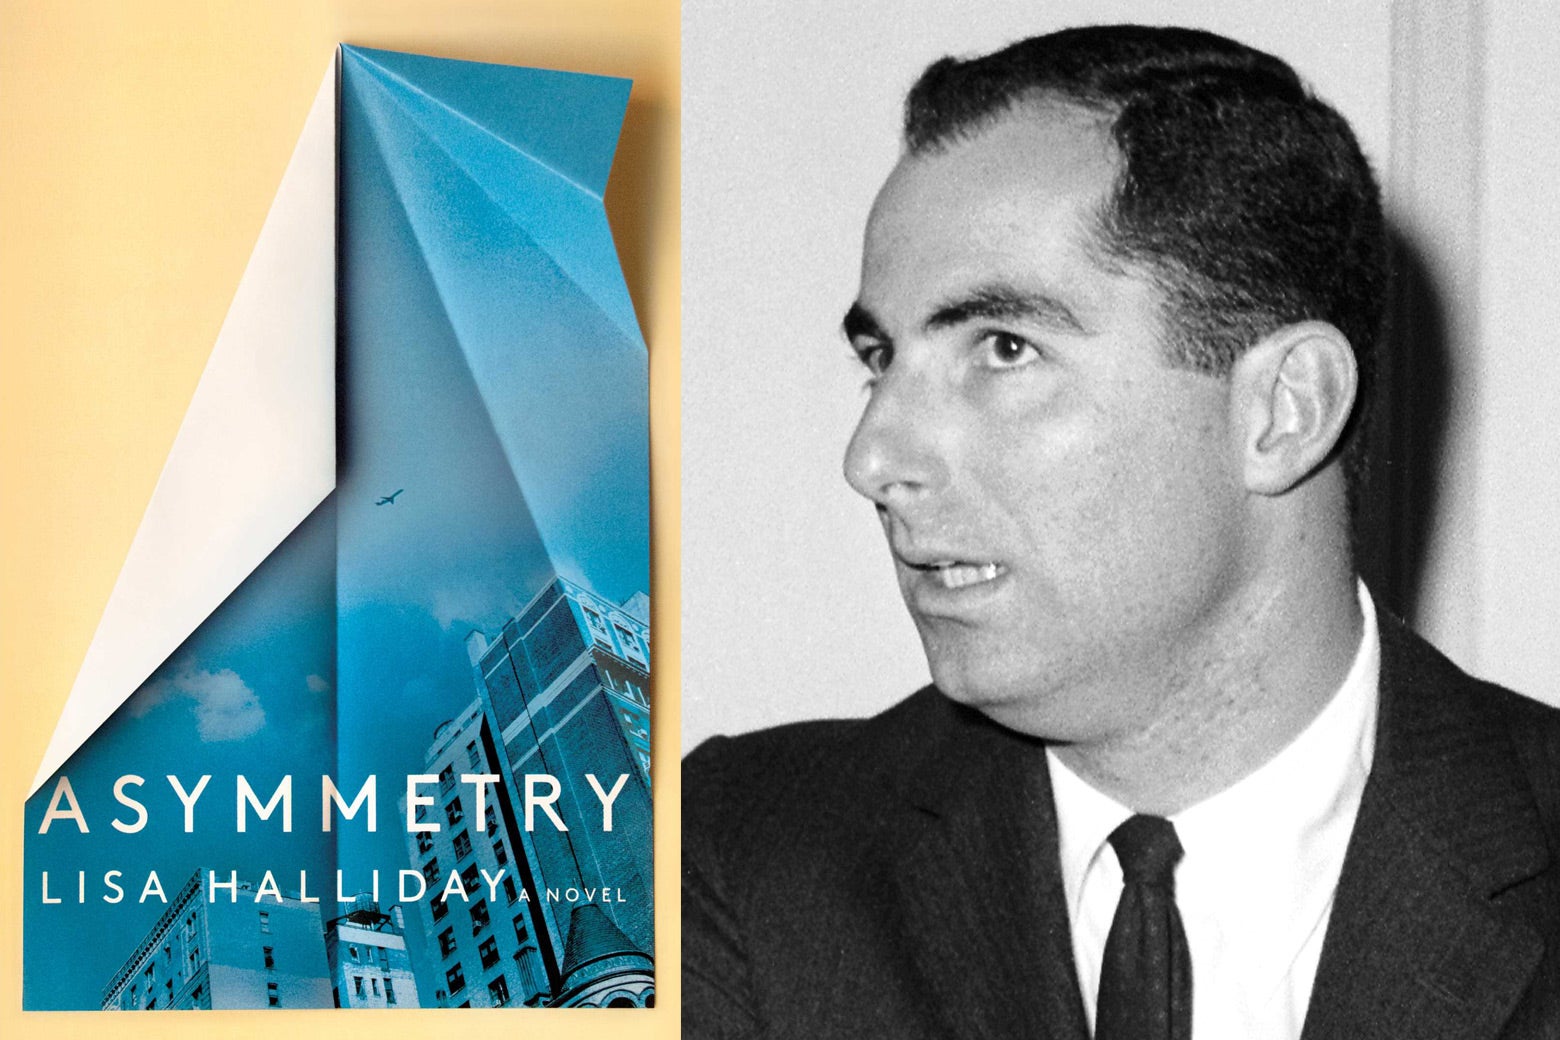 The cover of Lisa Halliday’s Asymmetry and a photo of Philip Roth.